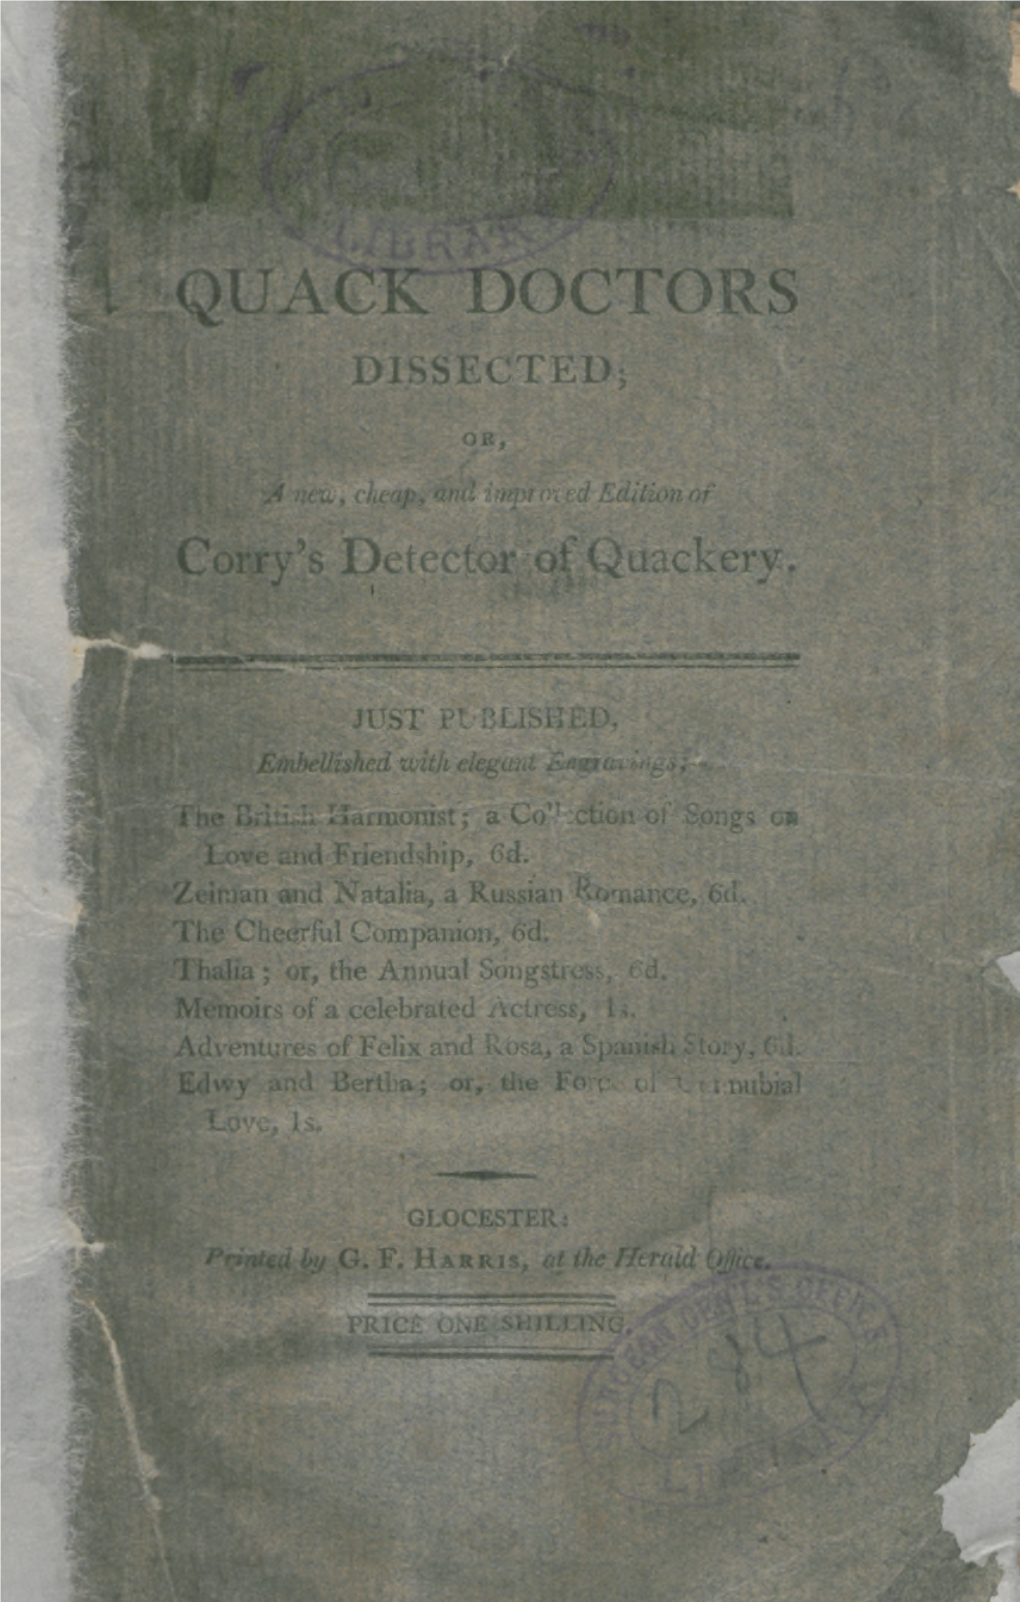 Quack Doctors Dissected, Or, a New, Cheap, and Improved Edition of Corry's Detector of Quackery